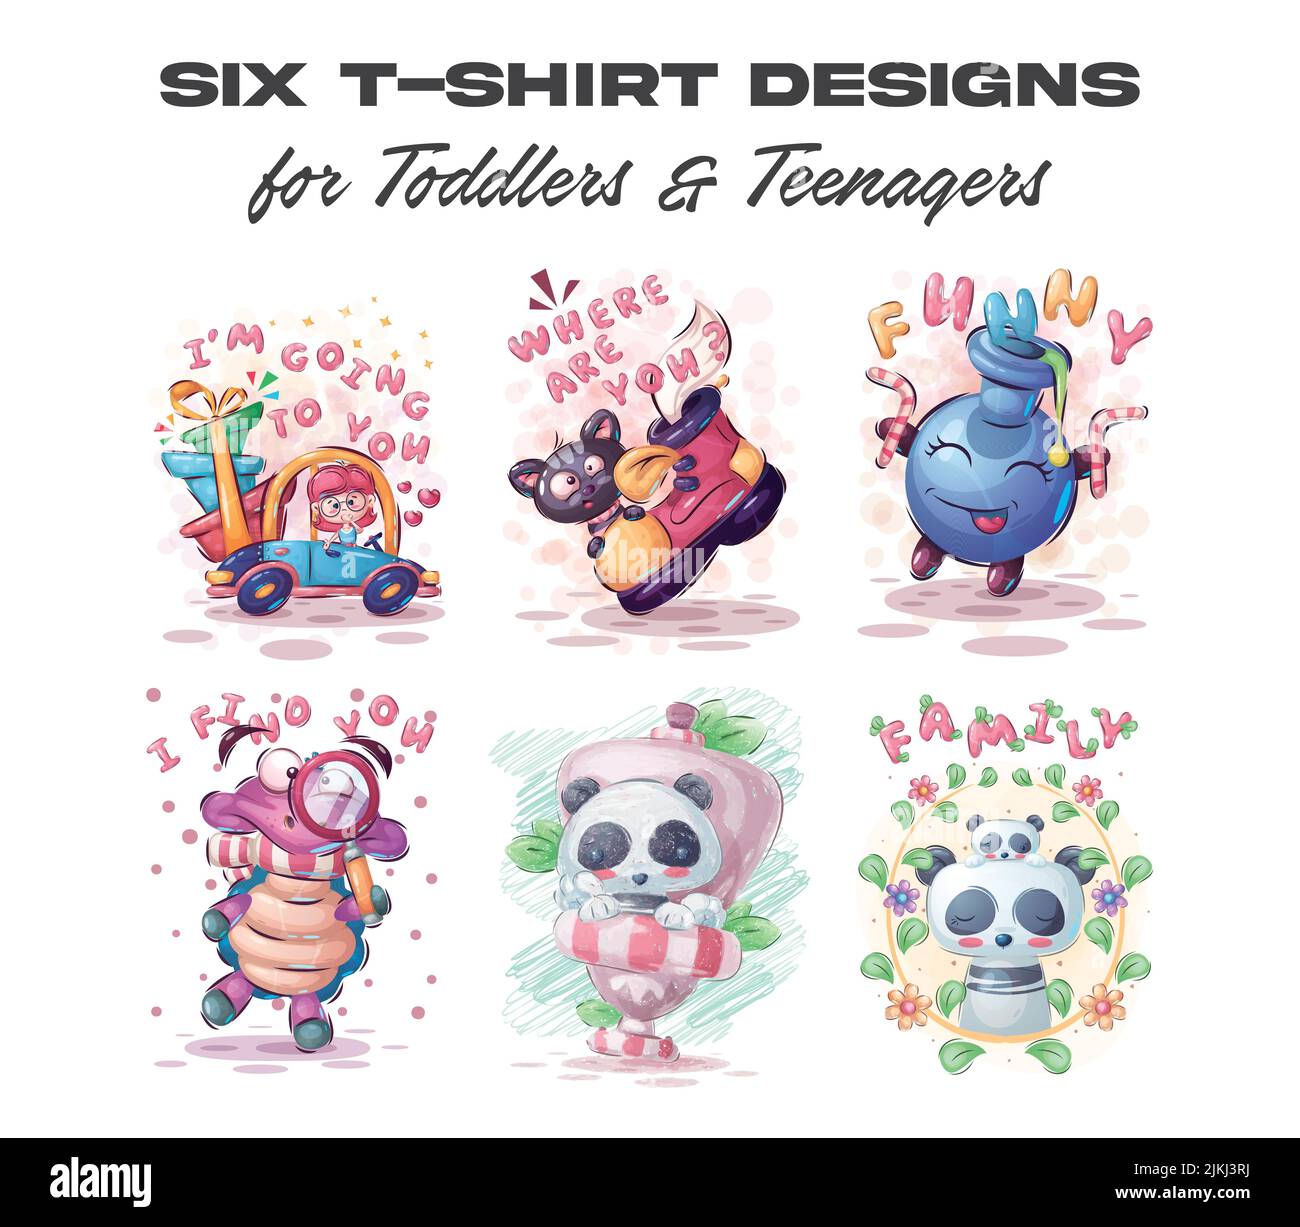 Cute animals, cars, toys and emotions text T-shirt design set for toddlers and teenagers vector illustration Stock Vector